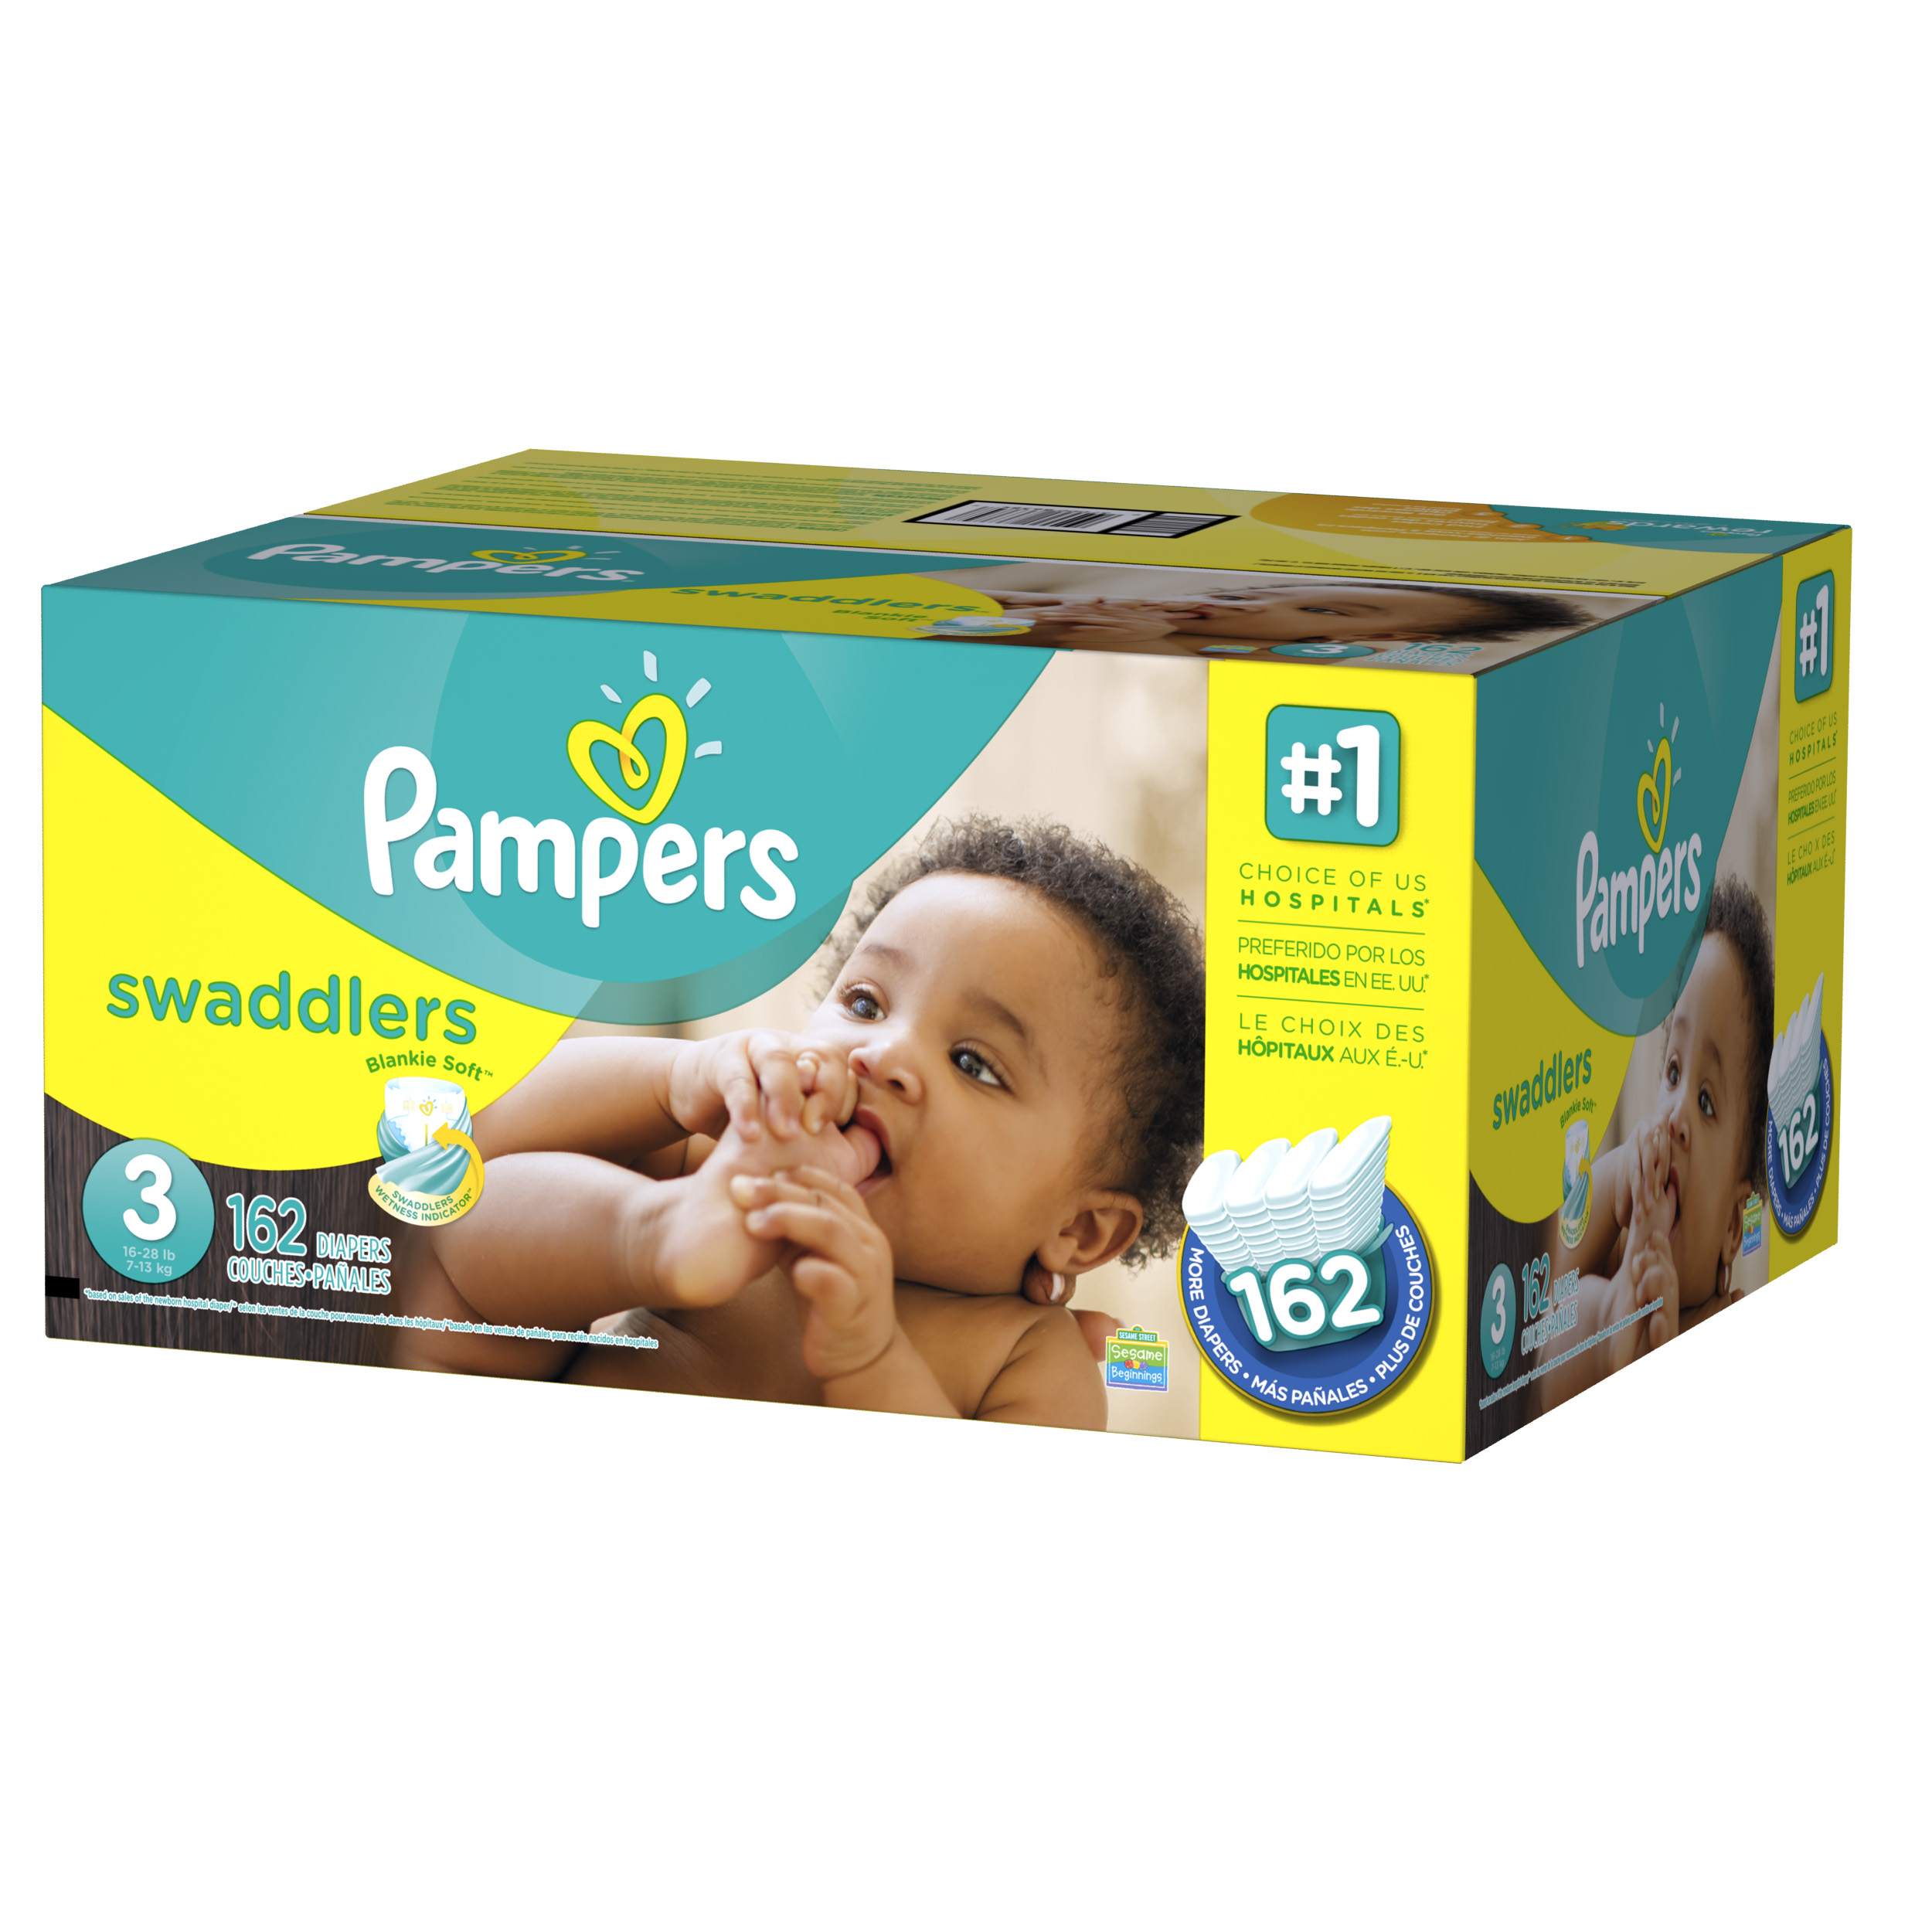 Pampers Swaddlers Diapers Size 3 162 count - image 1 of 10